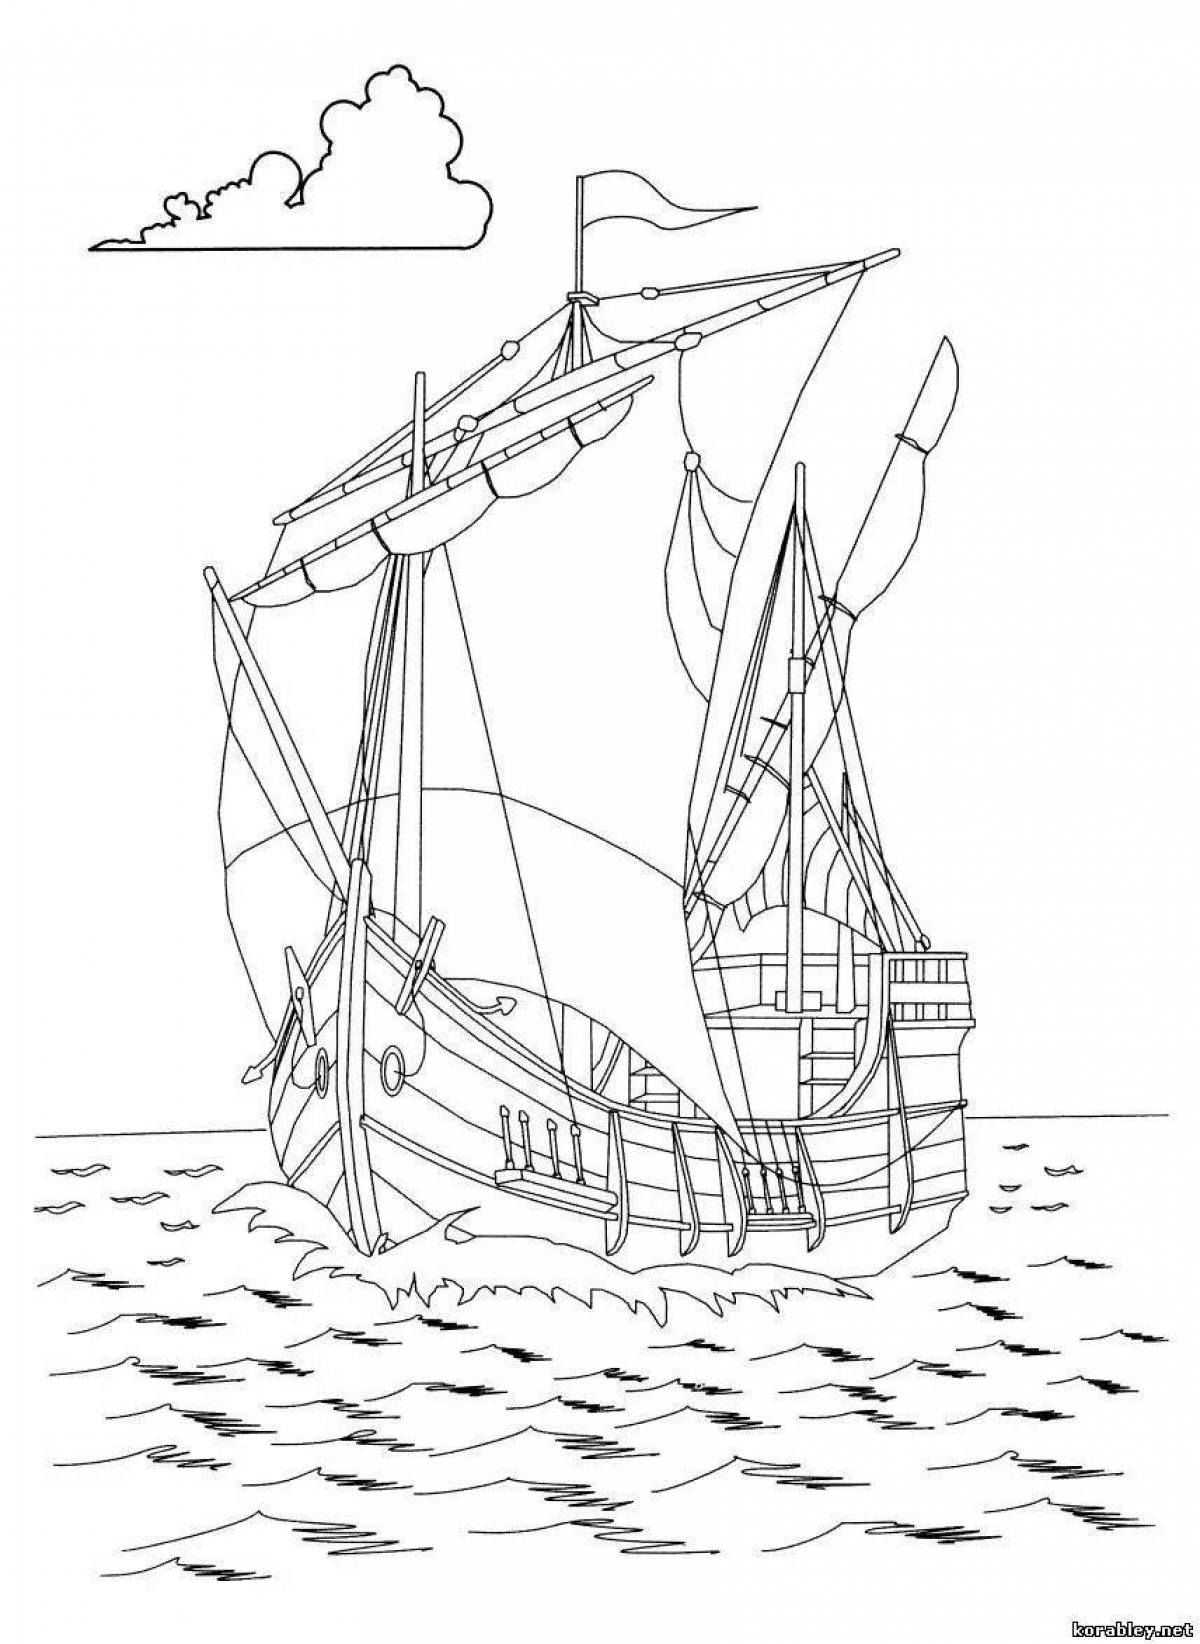 Ship with sails #6